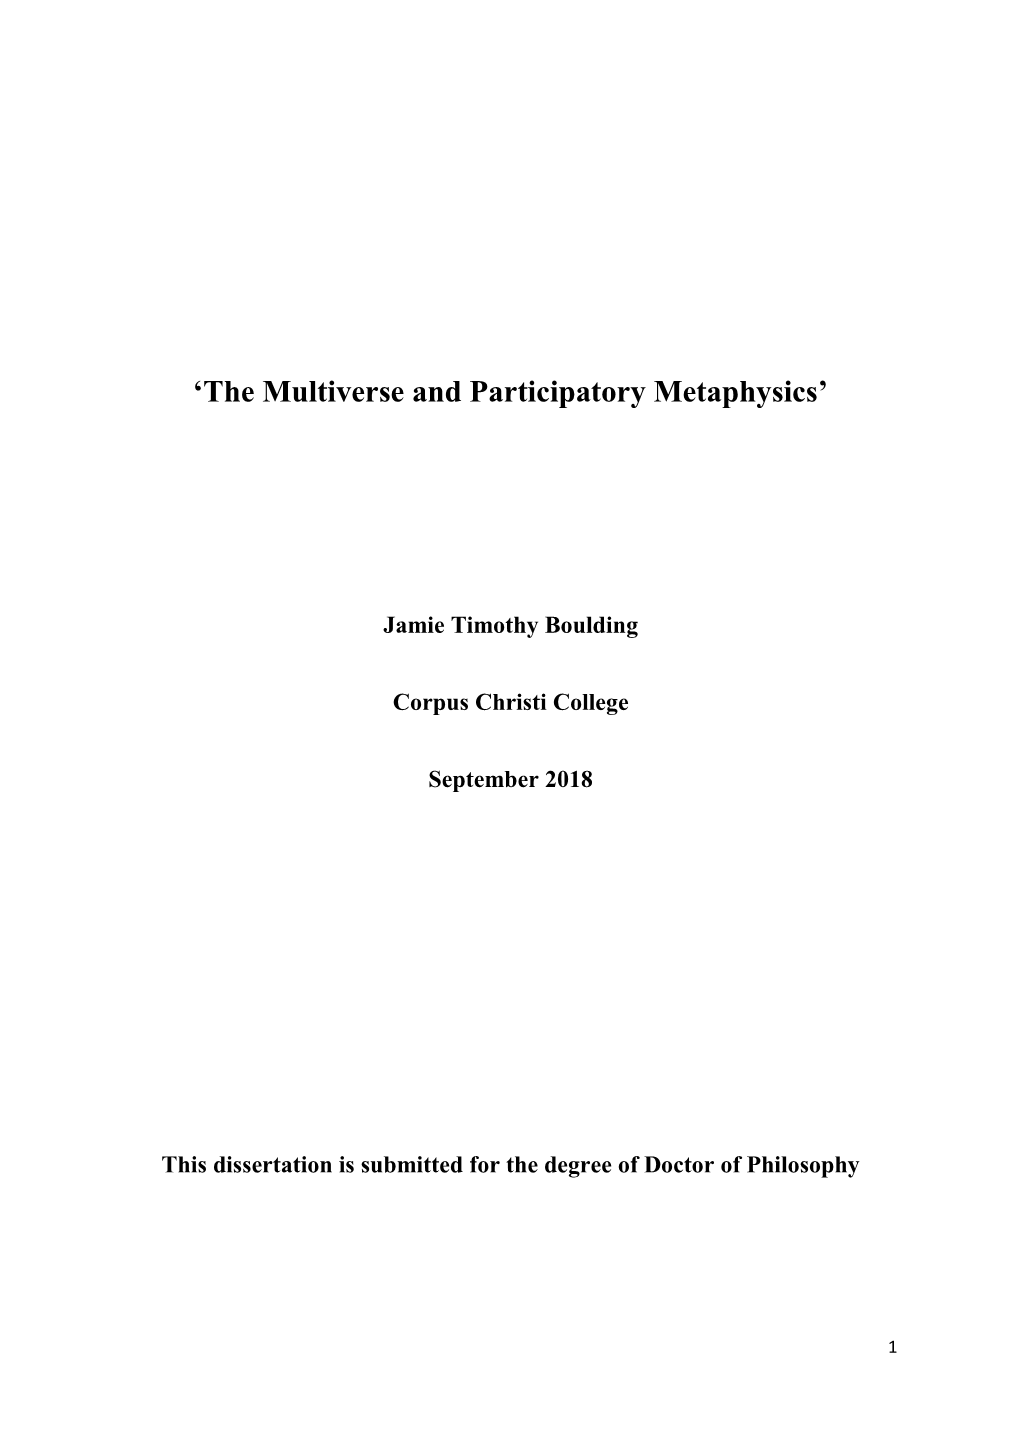 'The Multiverse and Participatory Metaphysics'